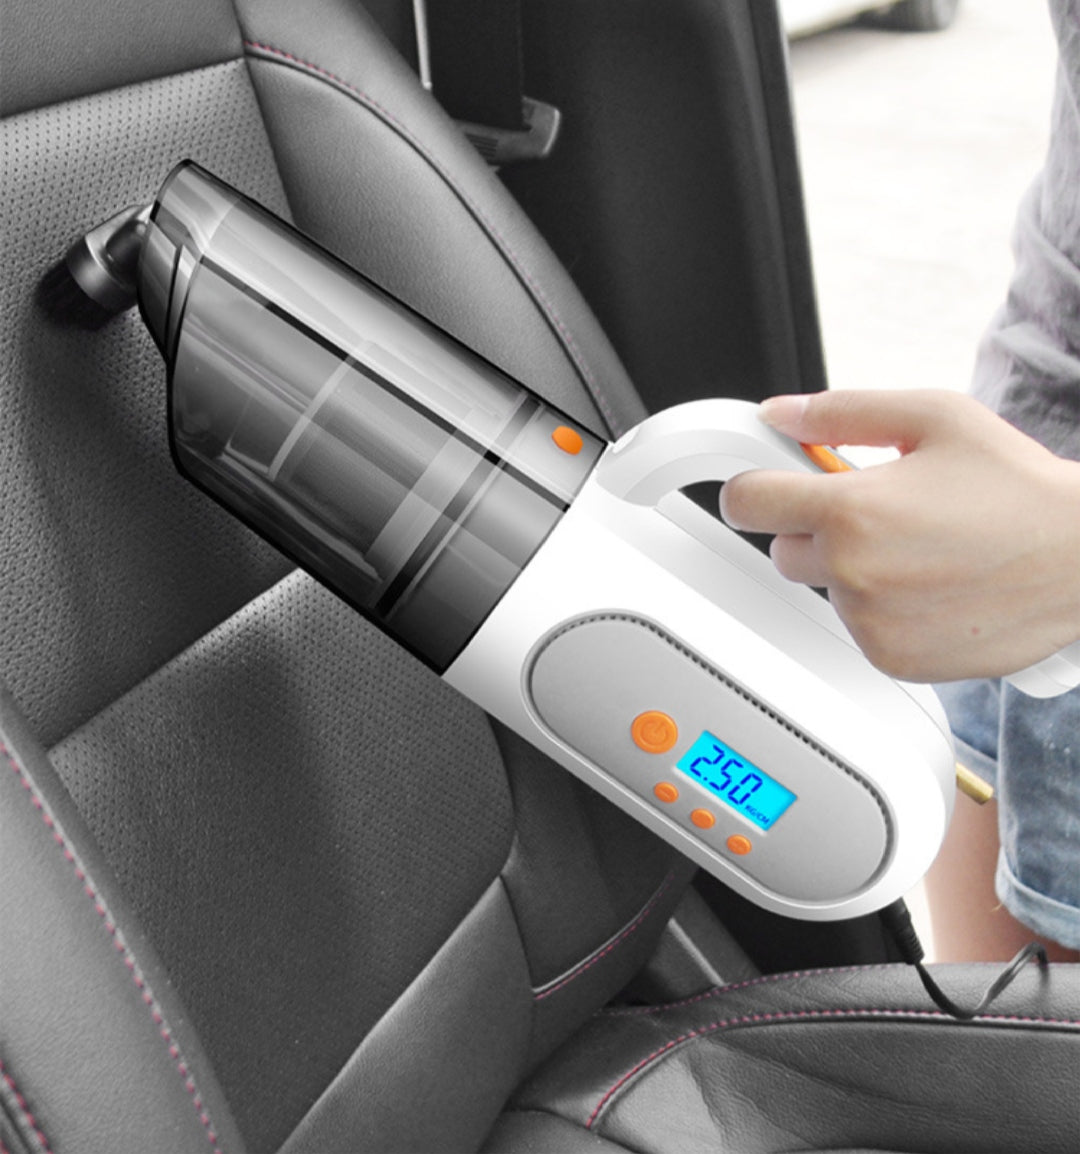 iGADG 4 in 1 Multifunctional Portable Handheld Car Vacuum Cleaner with Tyre Inflator LED Light